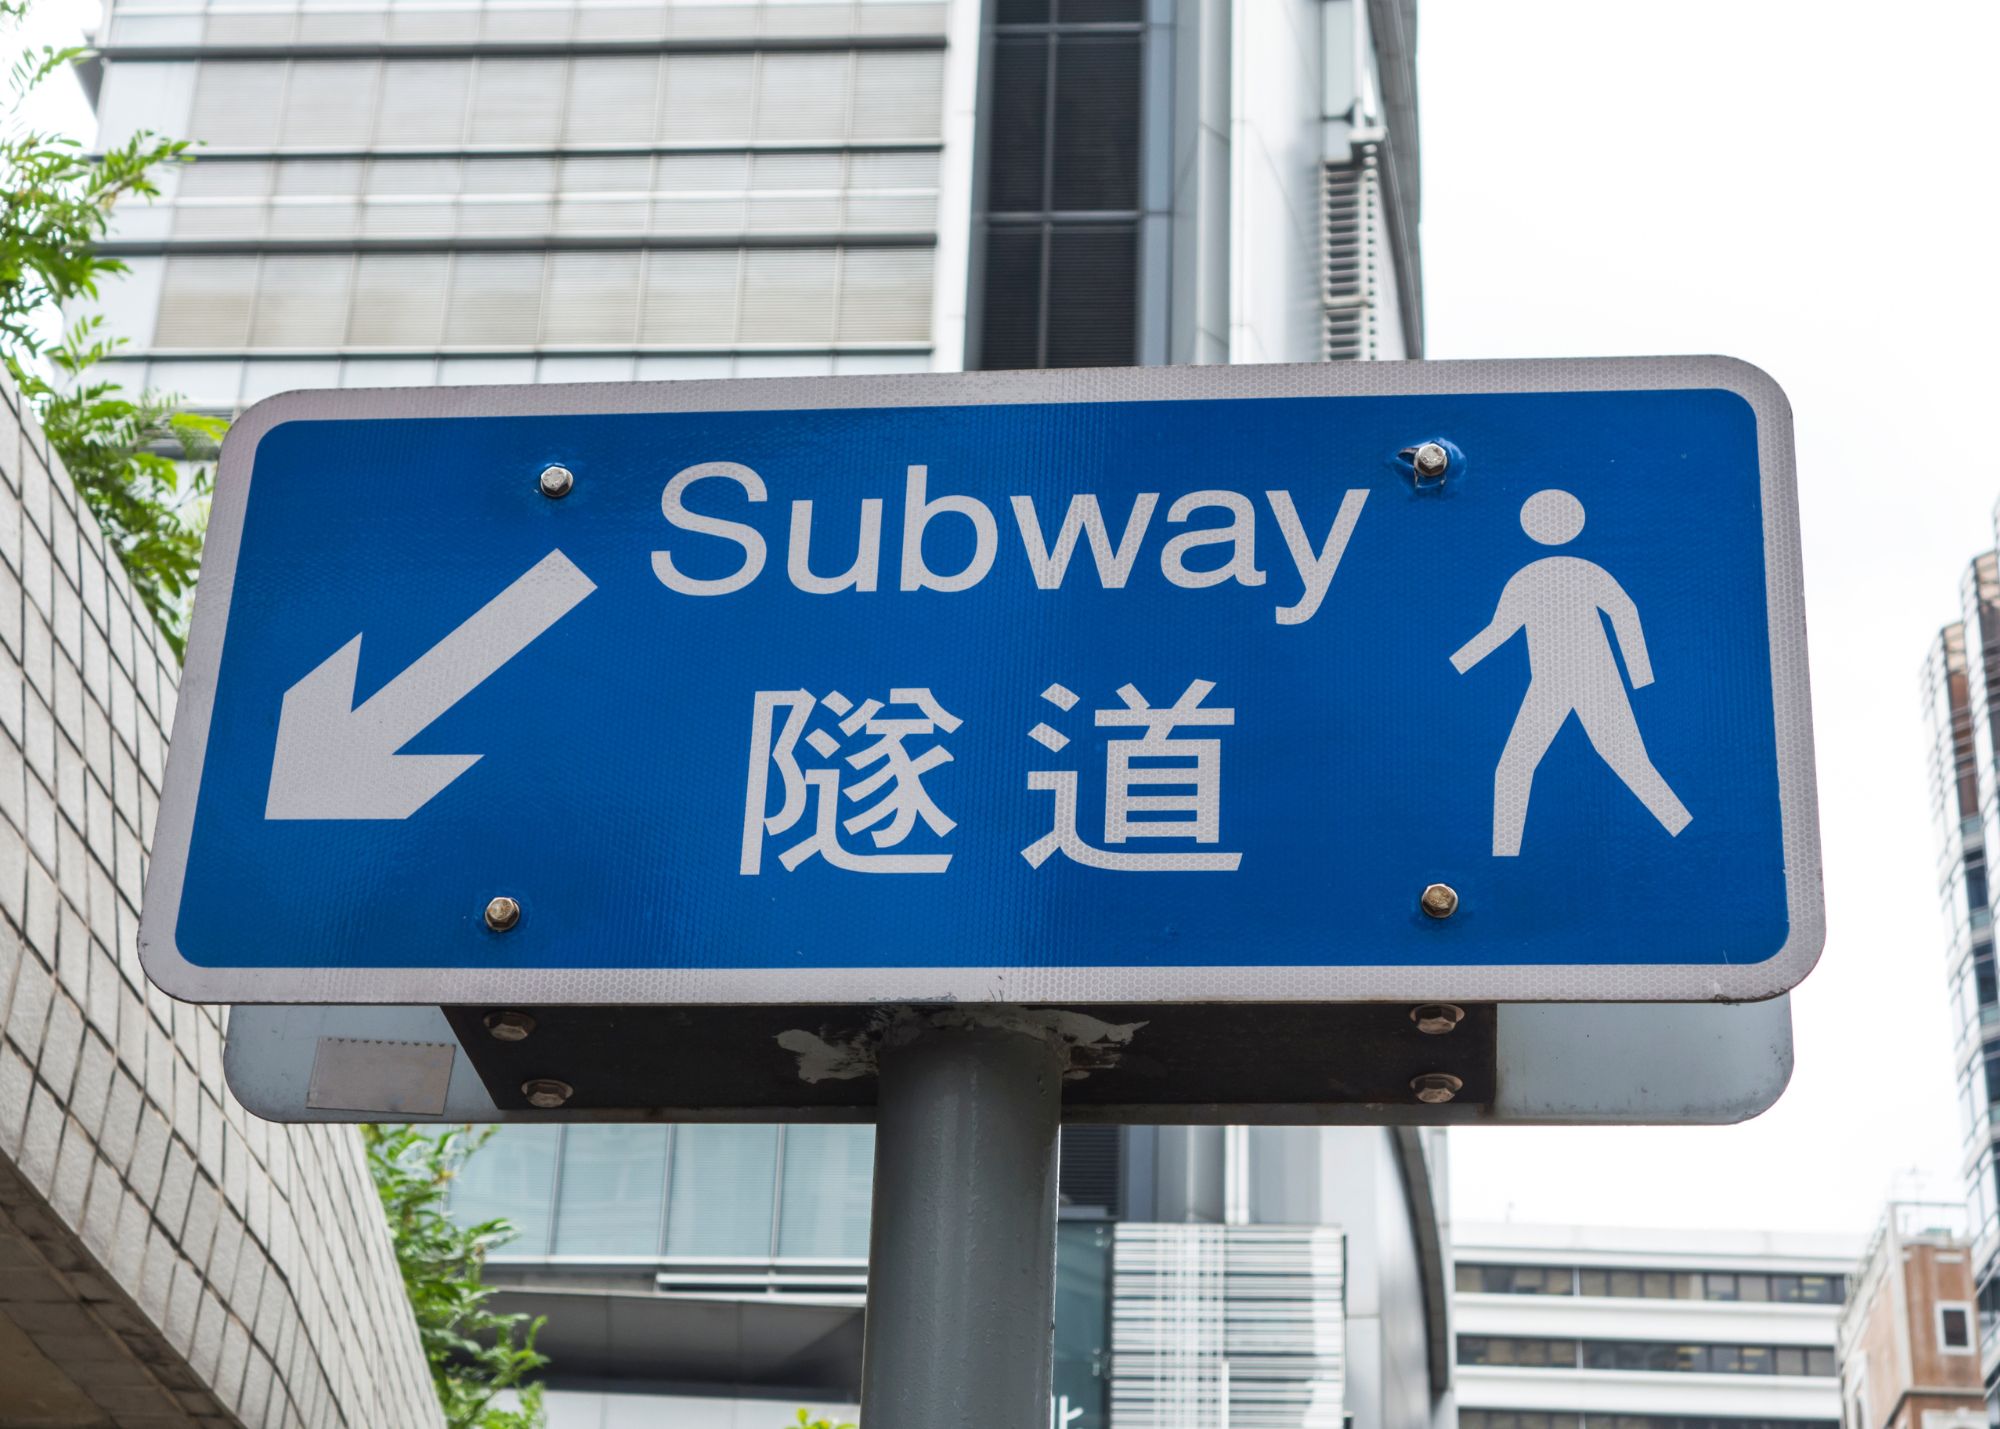 A public subway sign translated into Chinese.